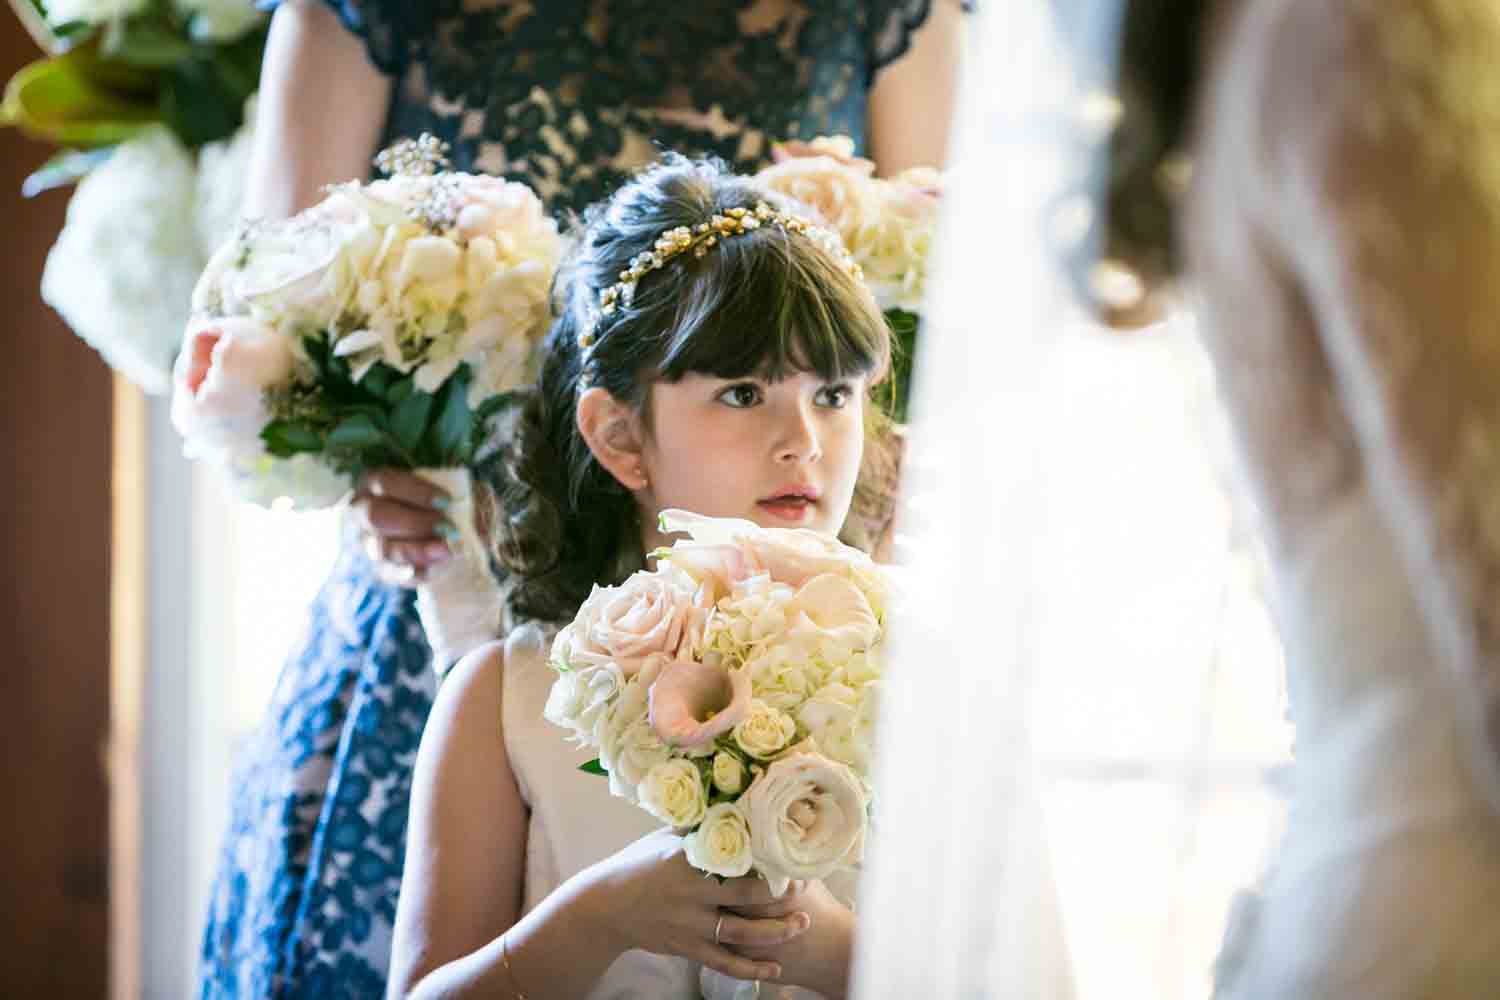 Flower girl watching ceremony at a Loeb Boathouse wedding in Central Park